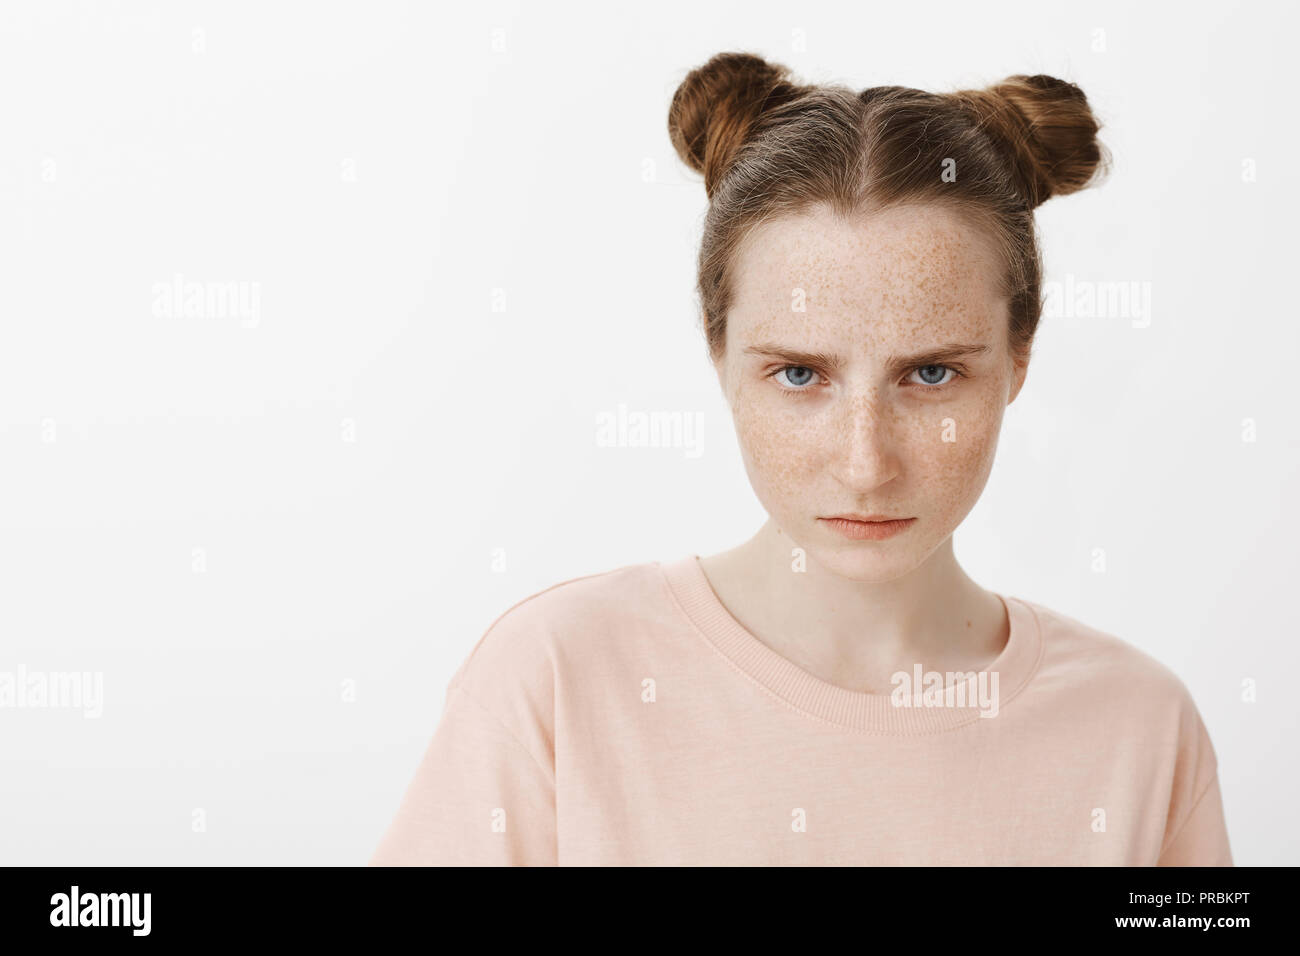 Girl looking at enemy, feeling scorn and anger, looking from under forehead at camera and frowning, standing serious and outraged over gray background, having bad day in school Stock Photo